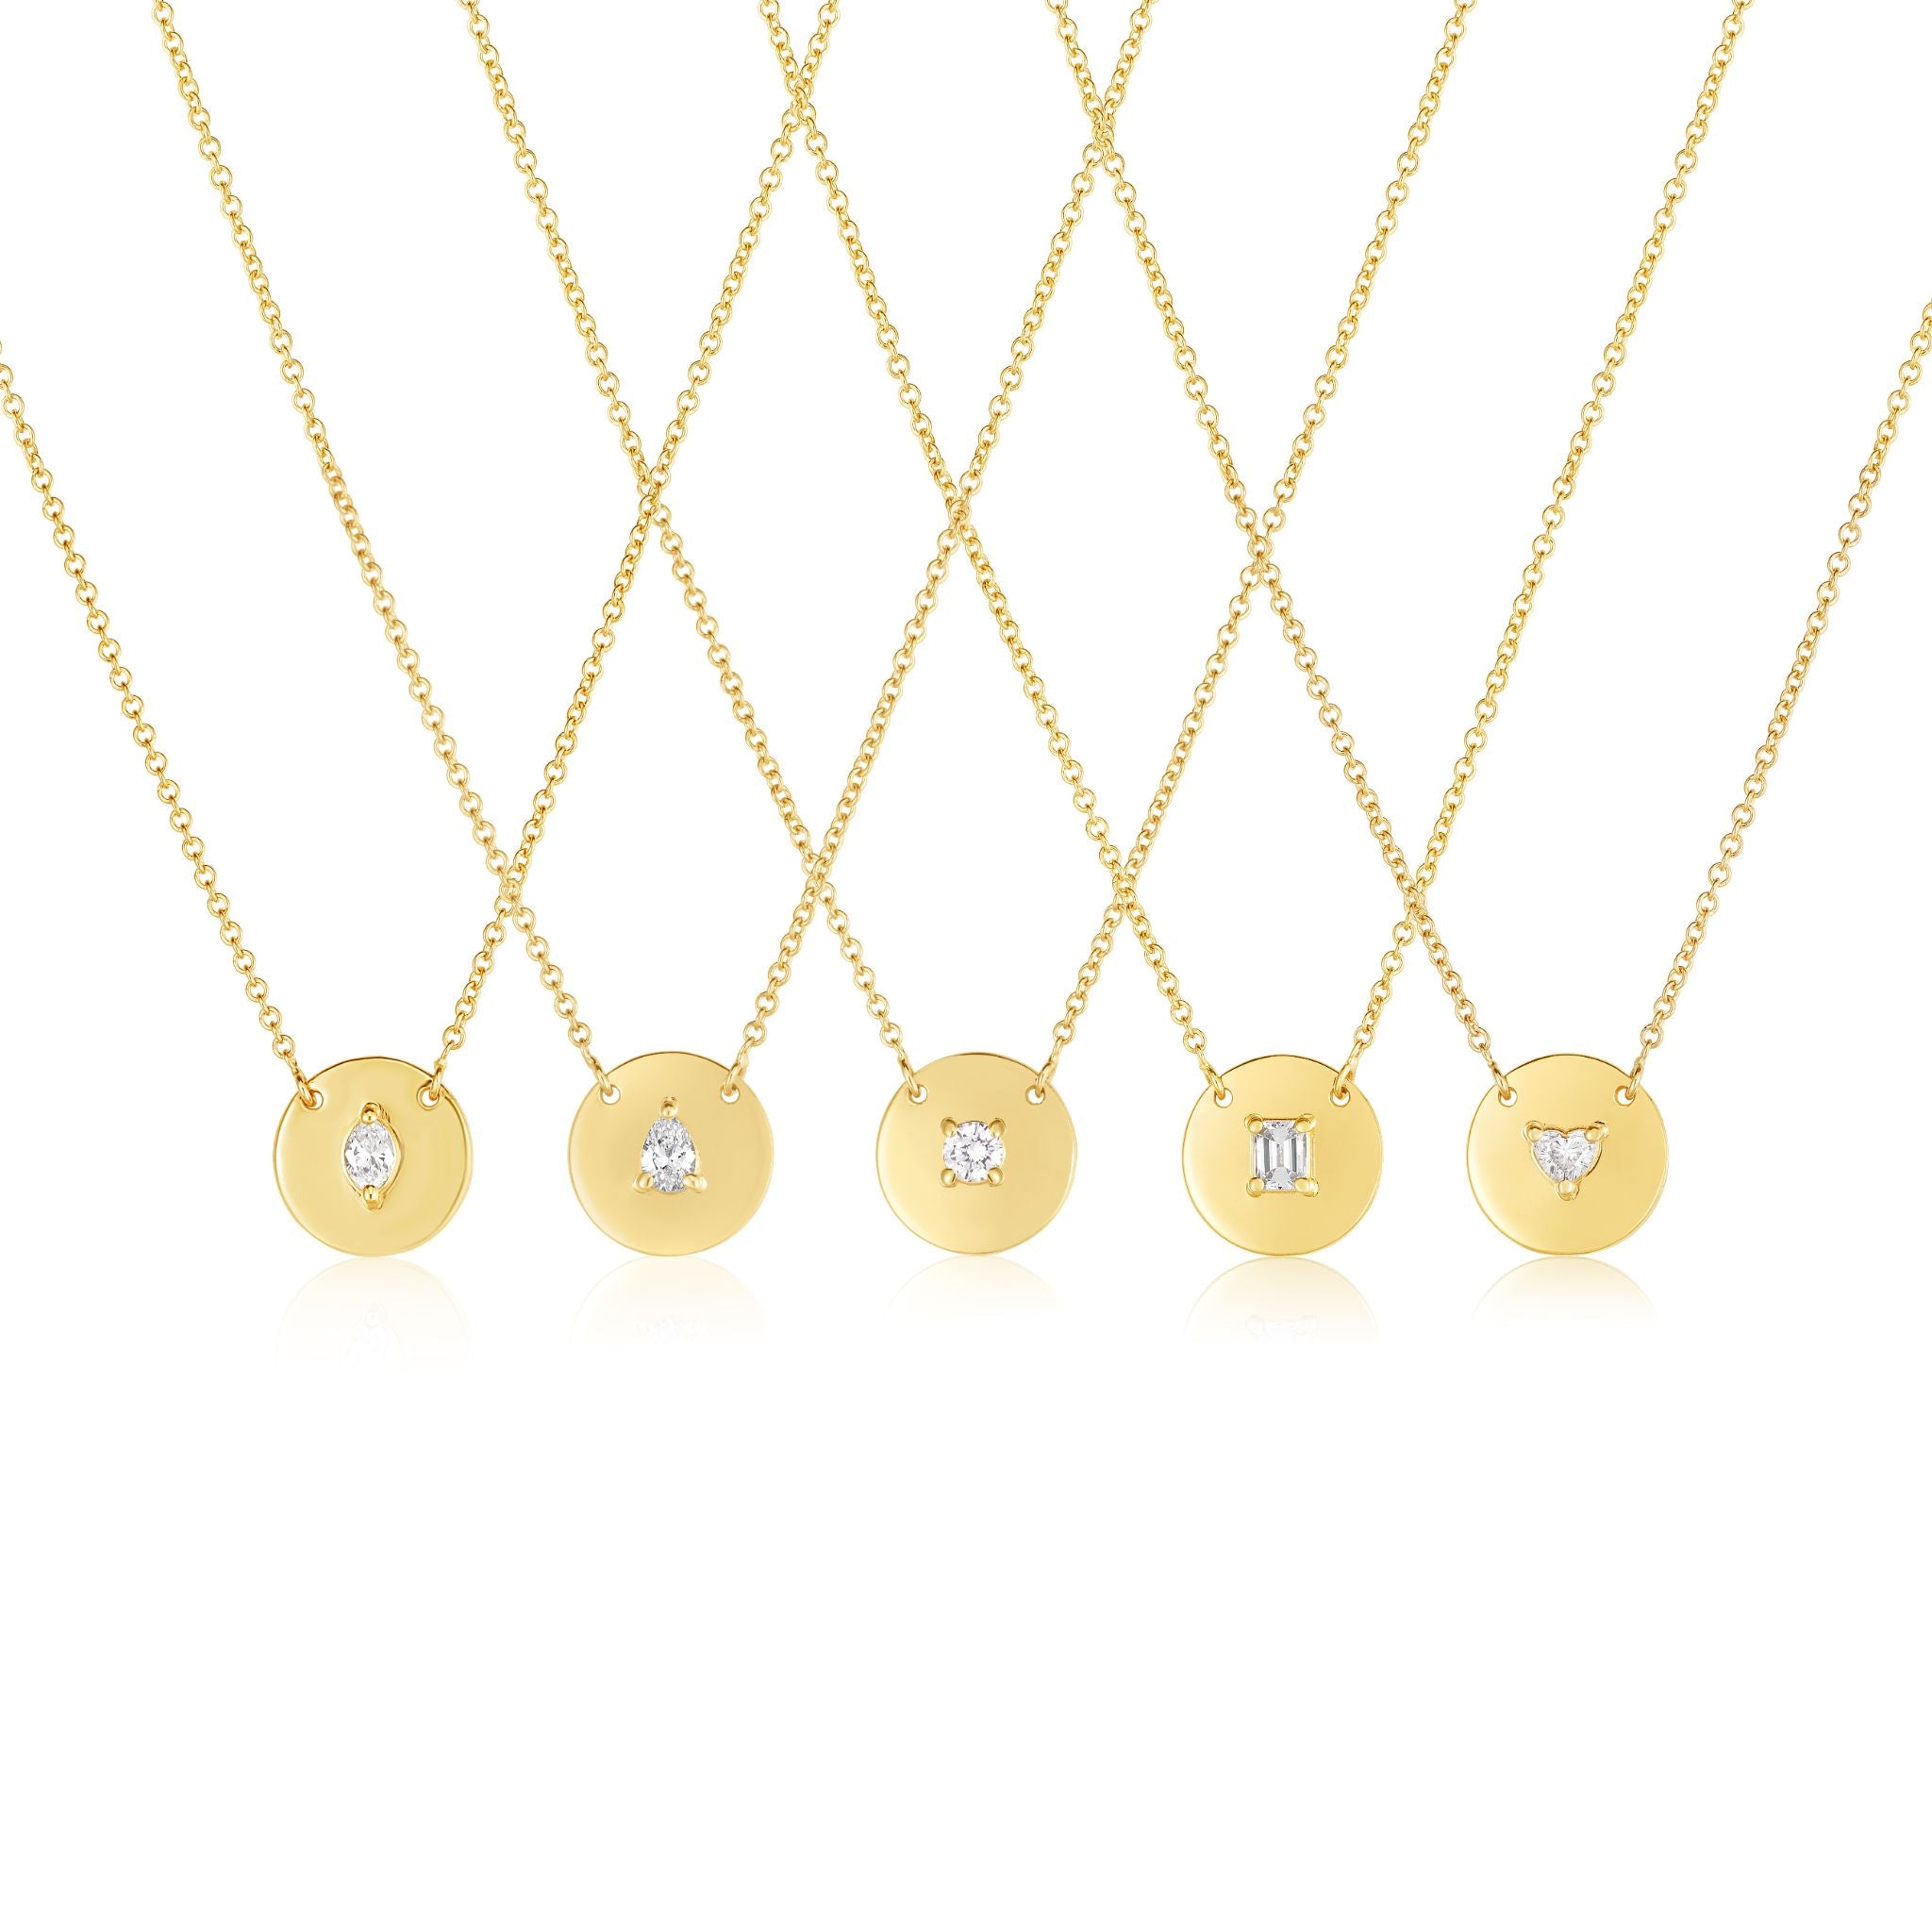 14K GOLD INLAID DIAMOND DISK NECKLACE